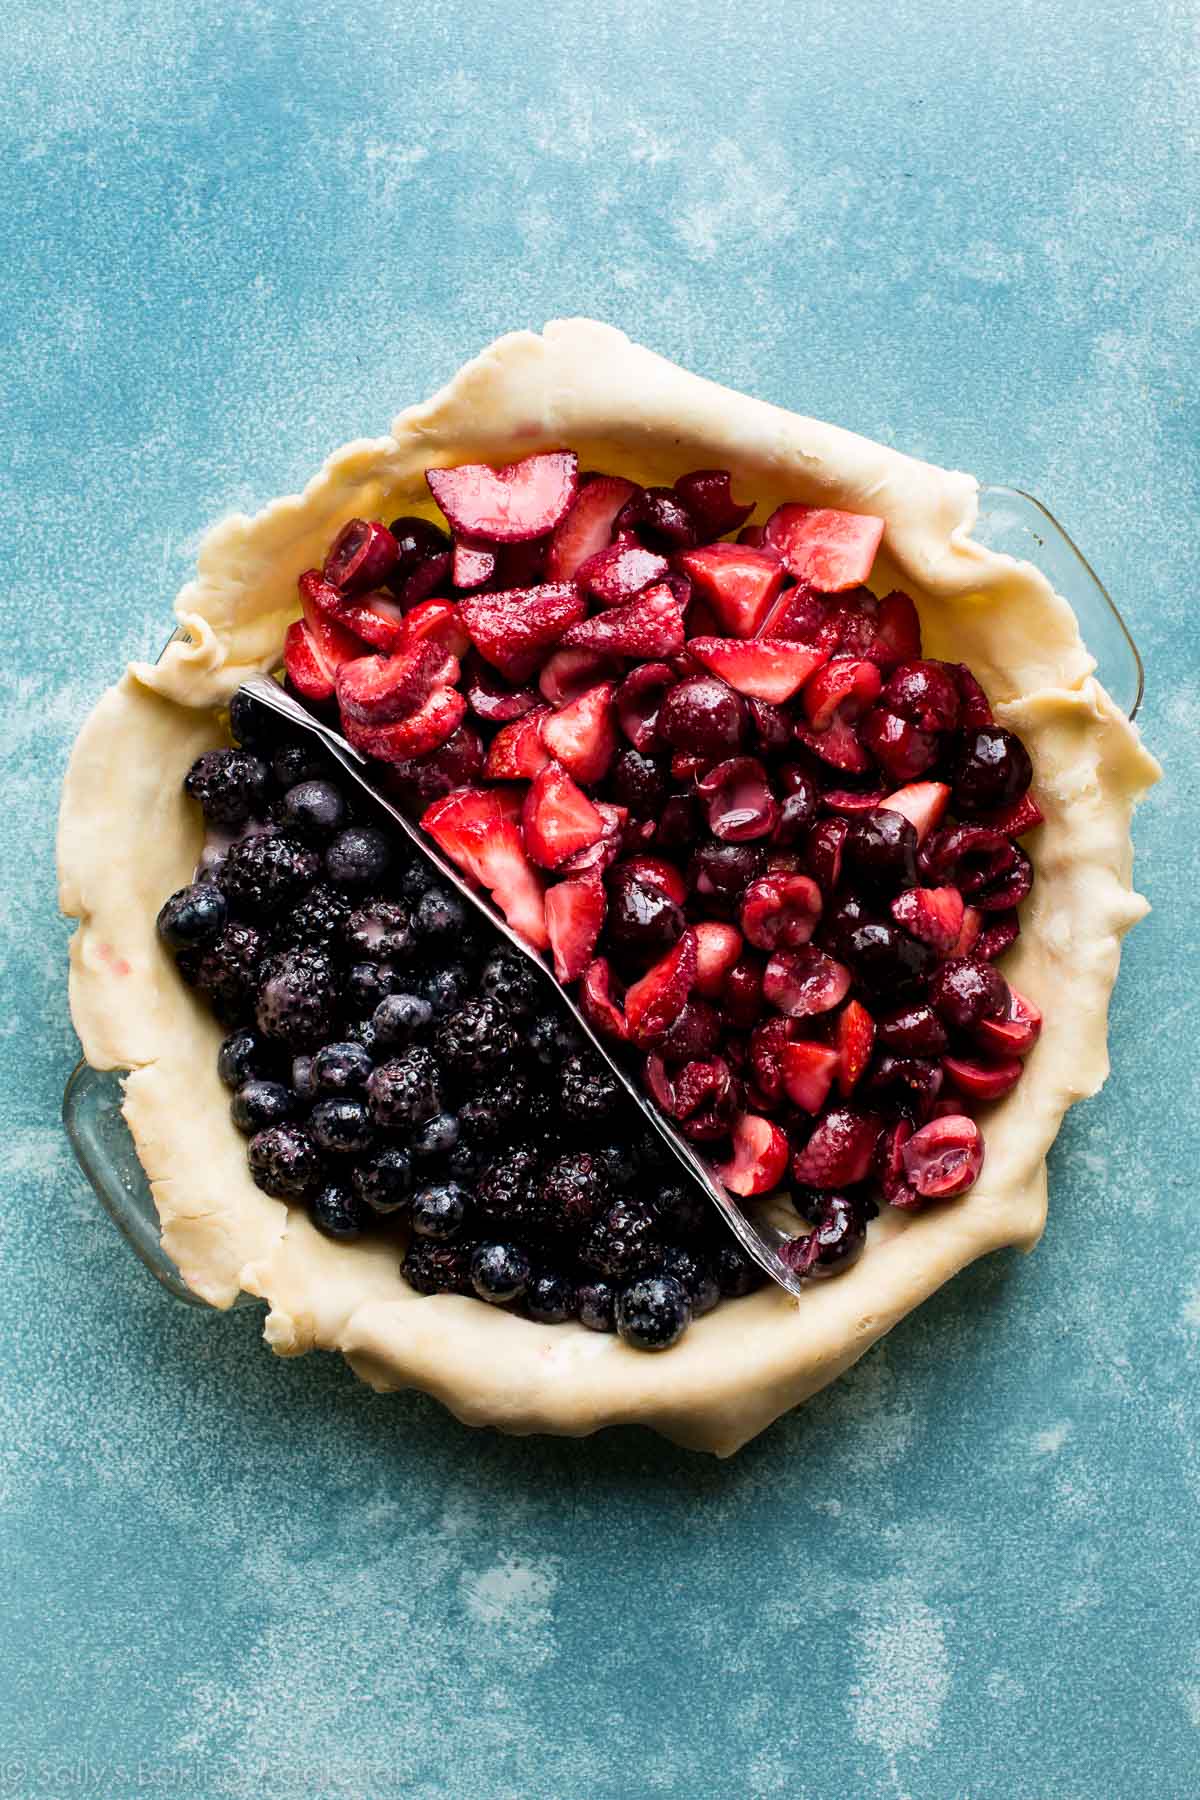 berry filling in pie dish with an aluminum foil divider between the blue and red sections of berries